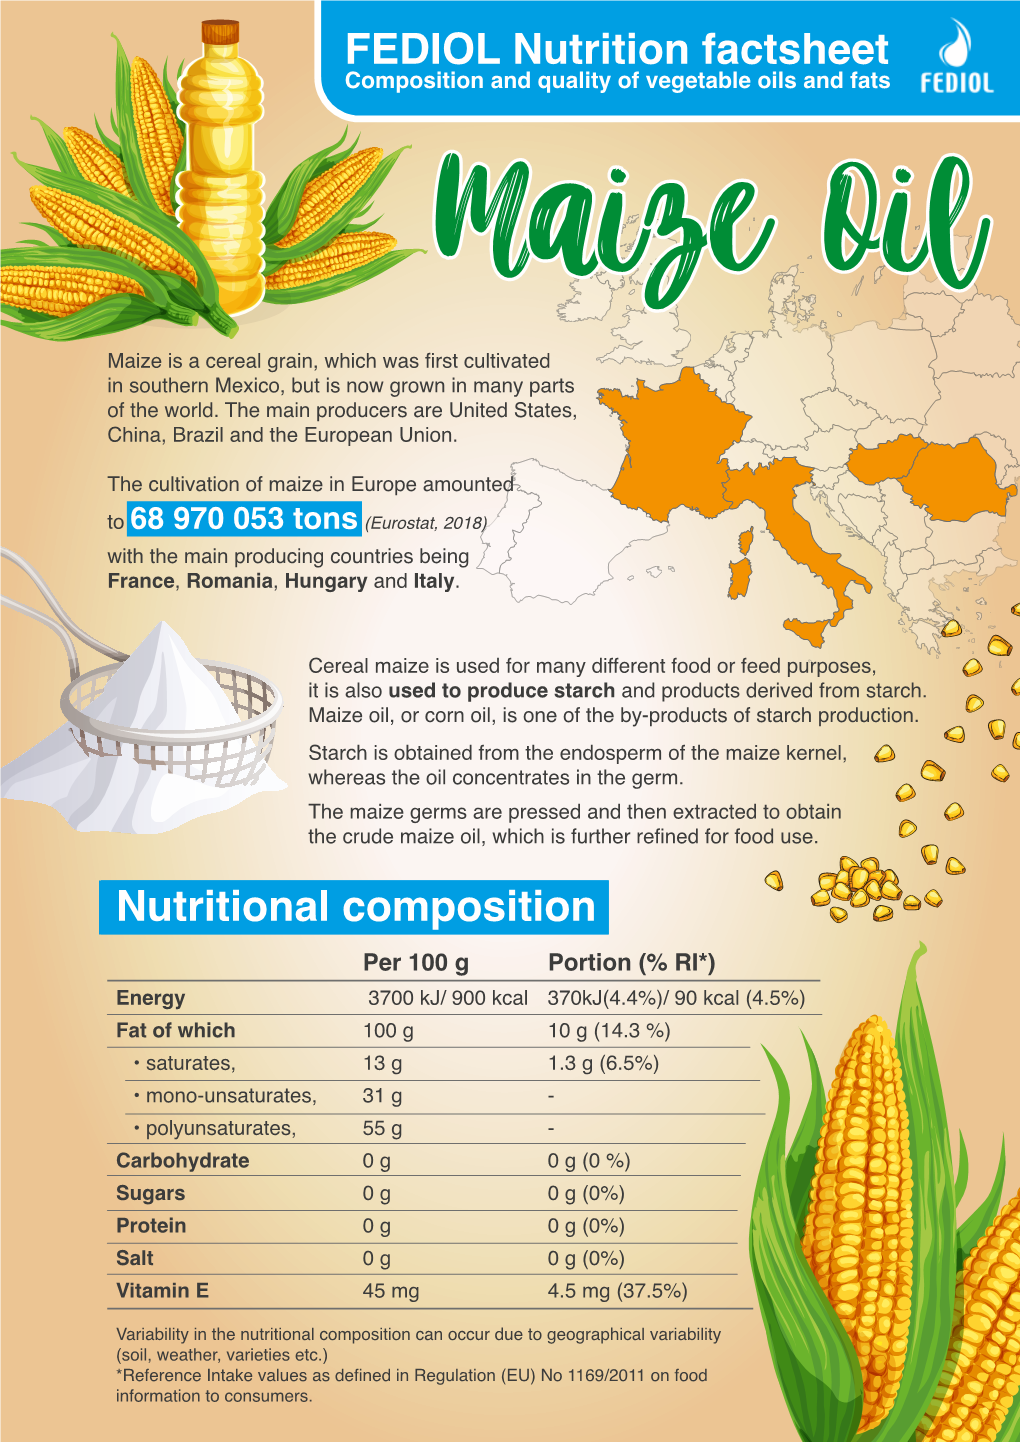 Maize Is a Cereal Grain, Which Was First Cultivated in Southern Mexico, but Is Now Grown in Many Parts of the World